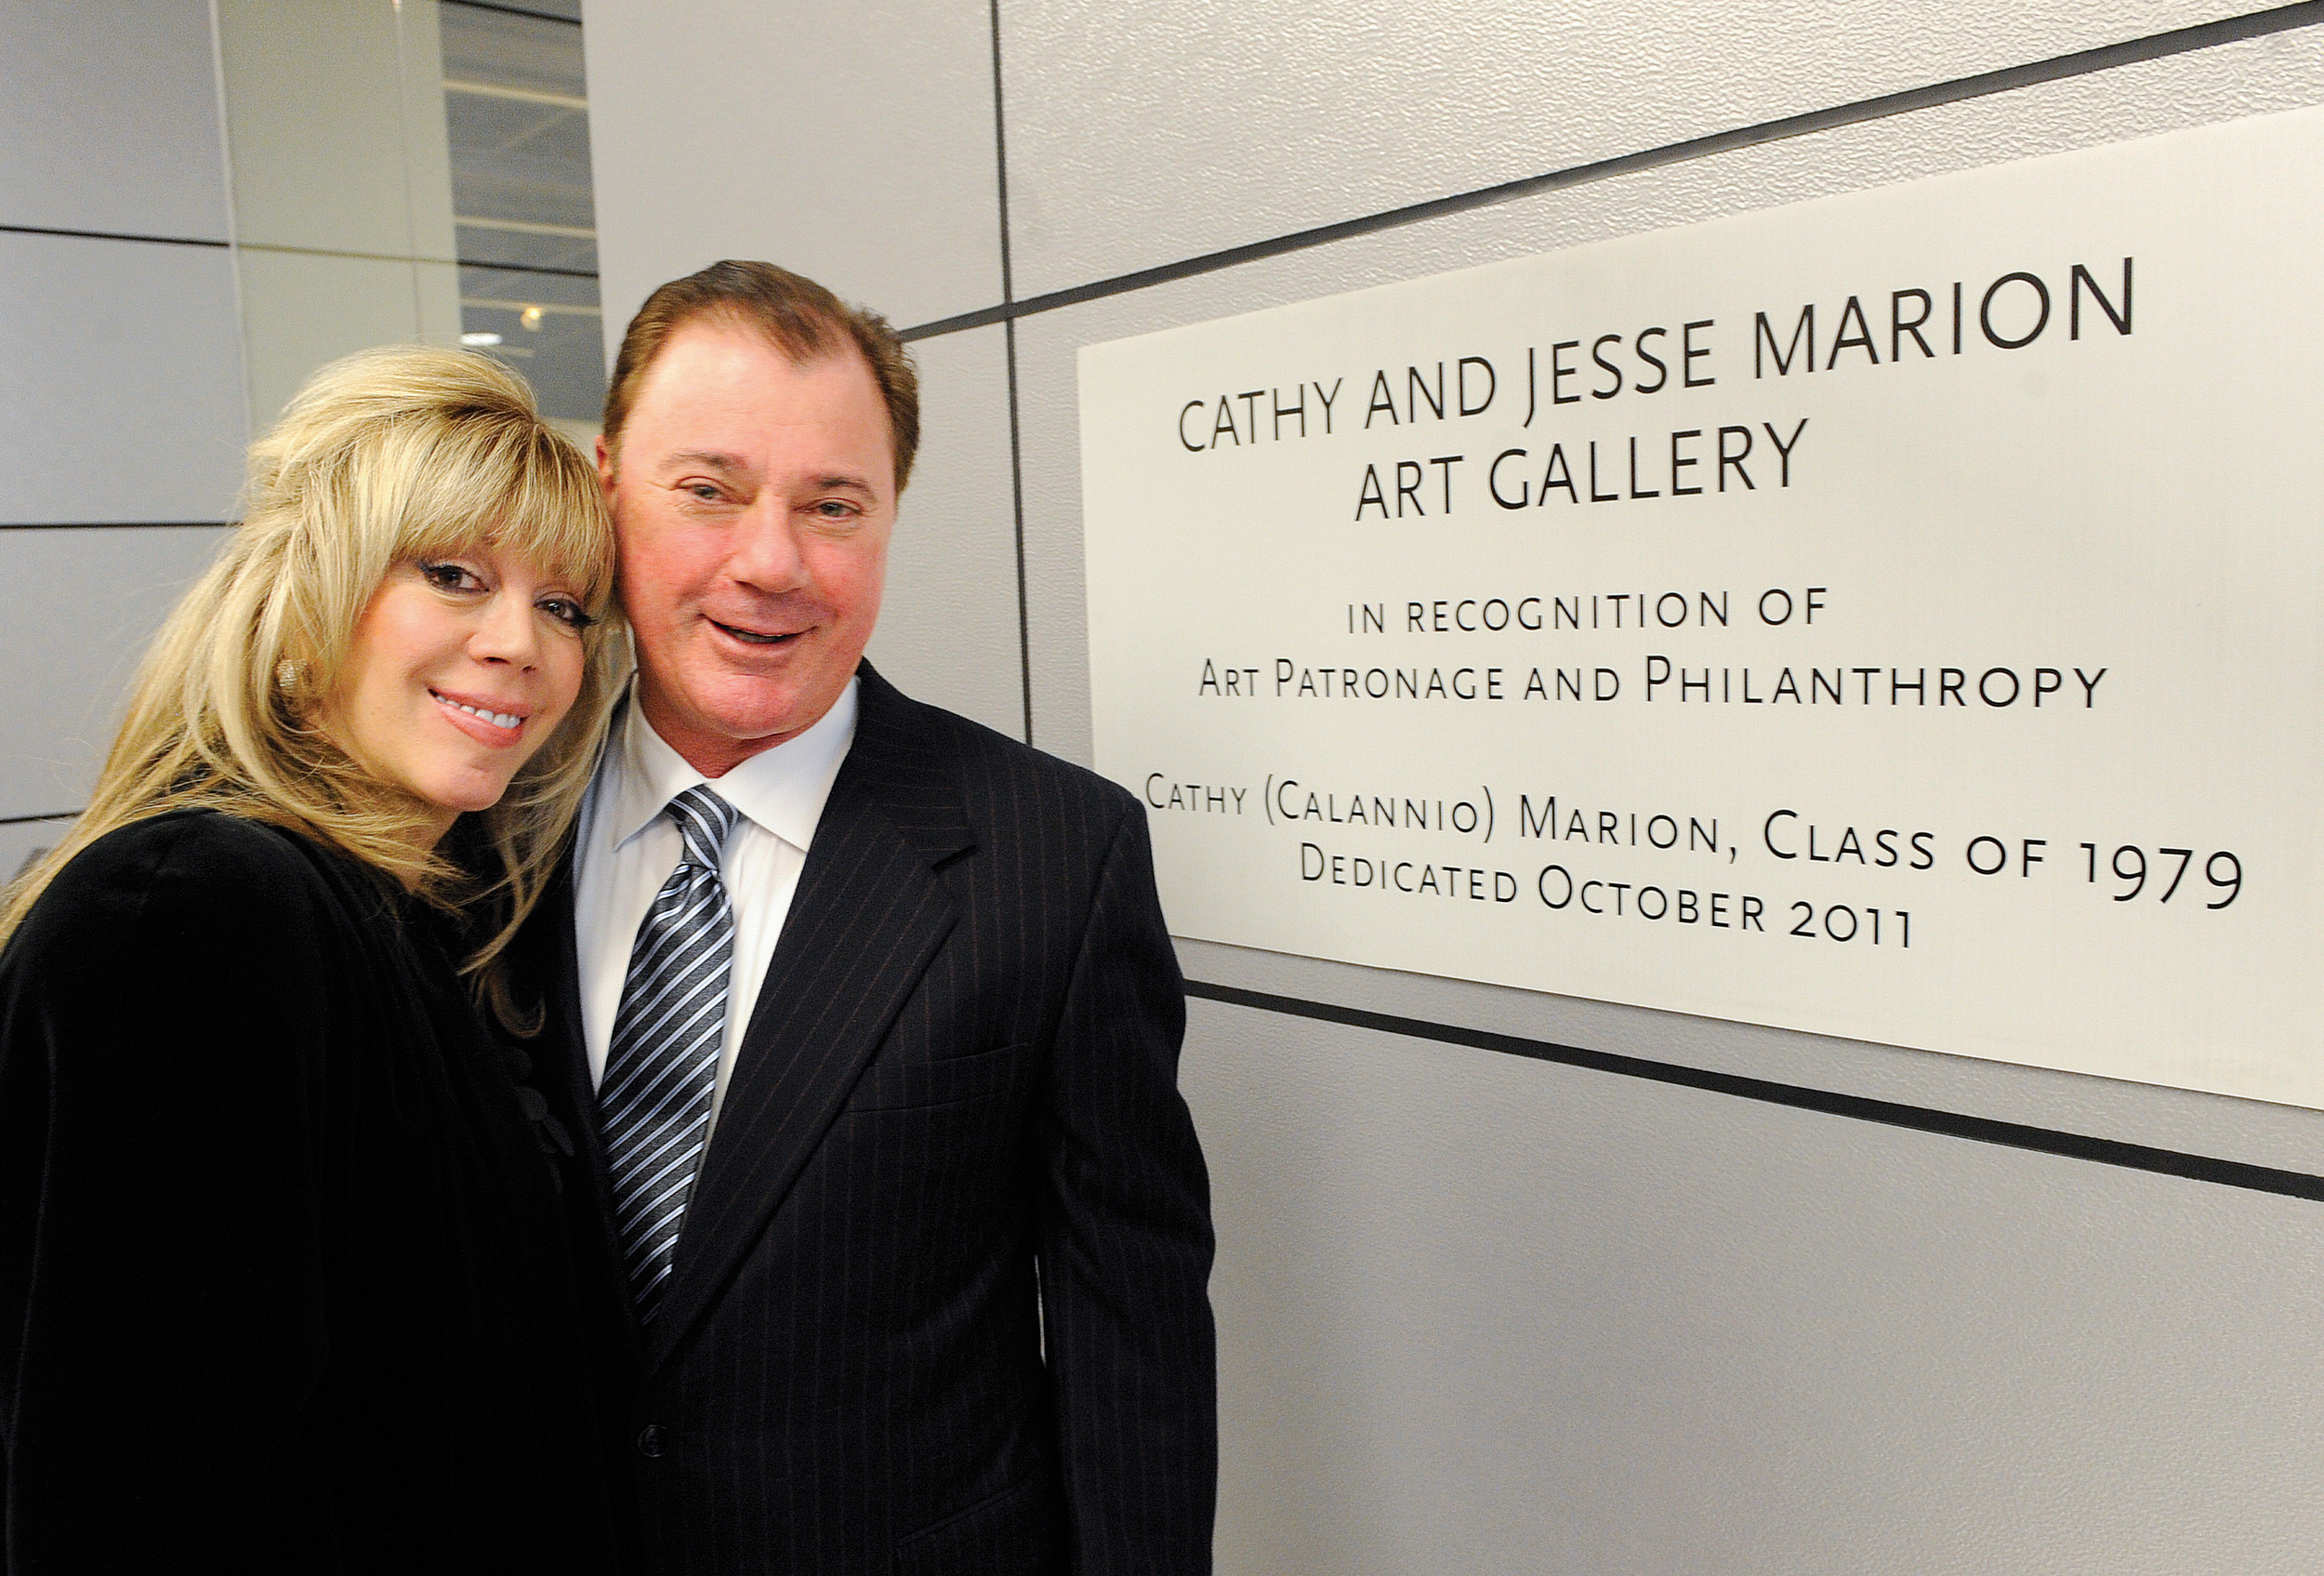 Cathy and Jesse Marion